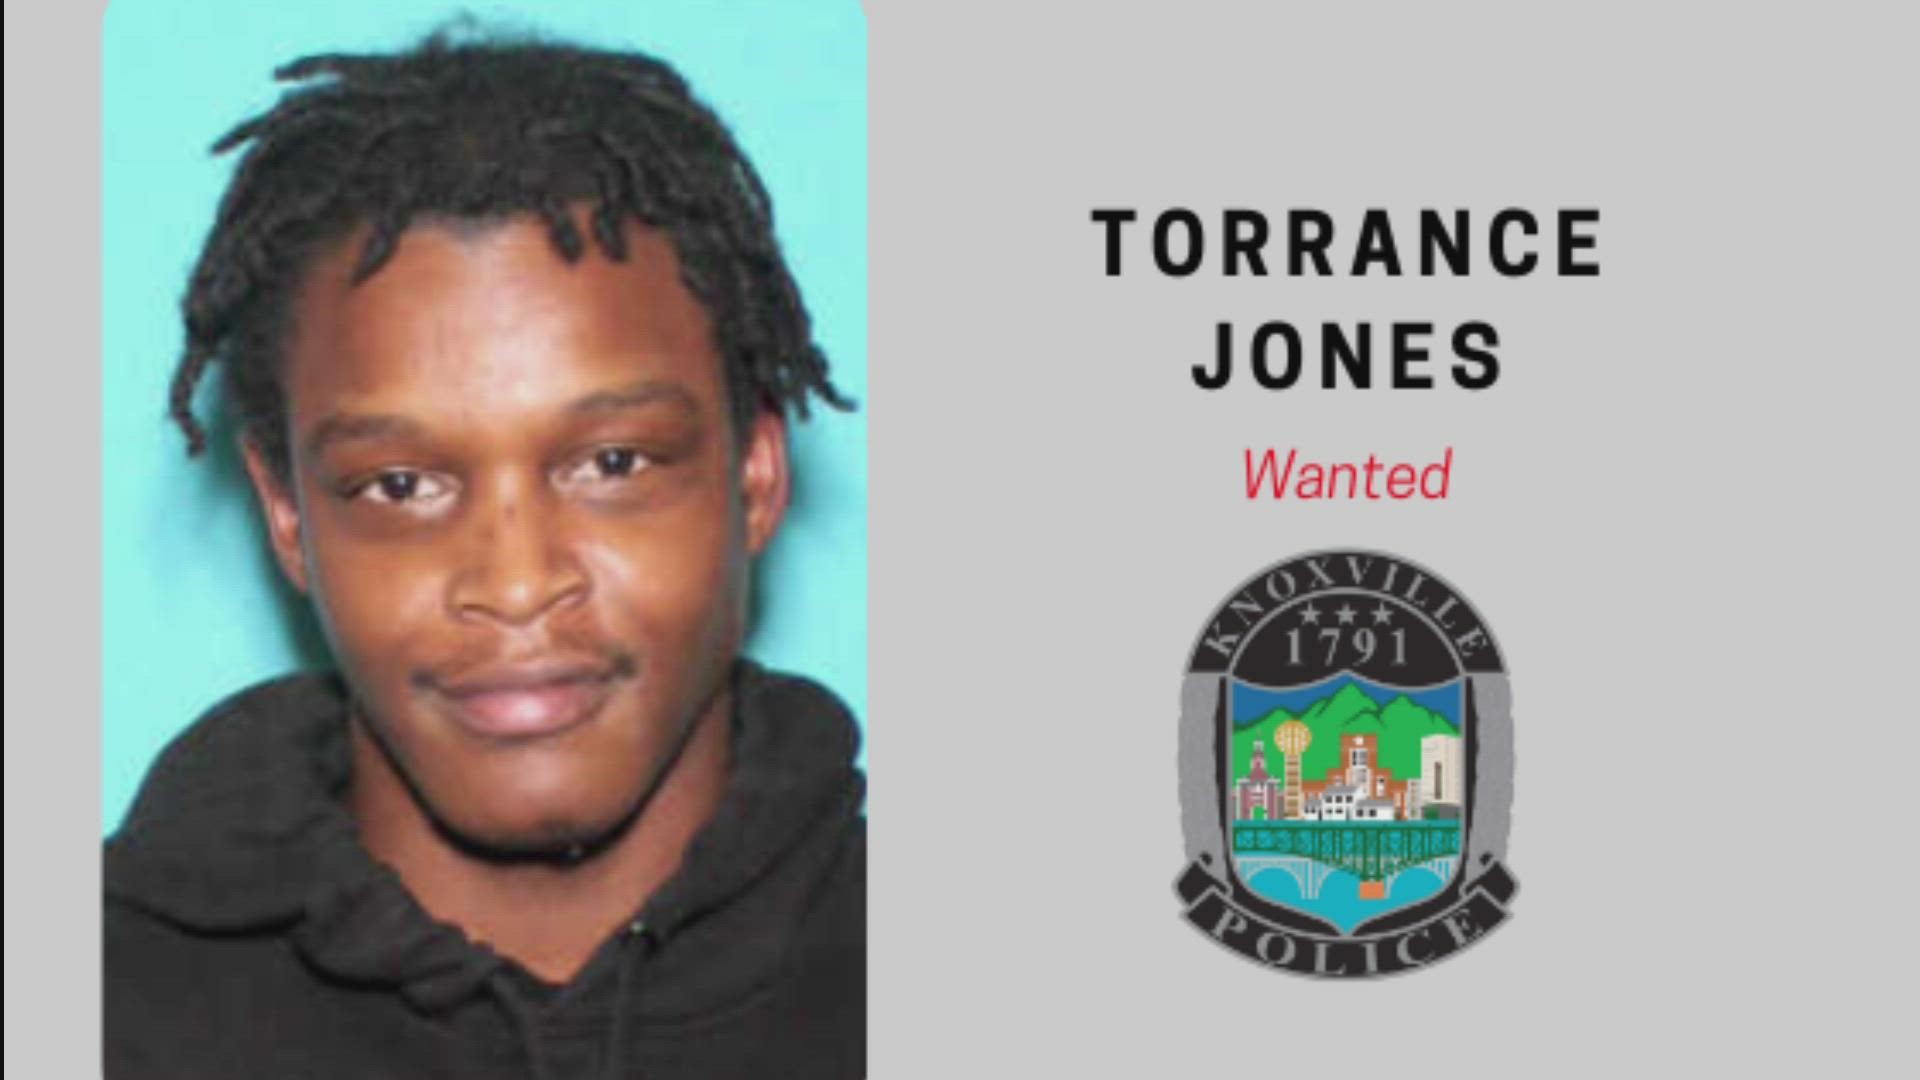 The Knoxville Police Dept. has identified the suspect as 27-year-old Torrance Jones. He is wanted for attempted second-degree murder and weapons charges.